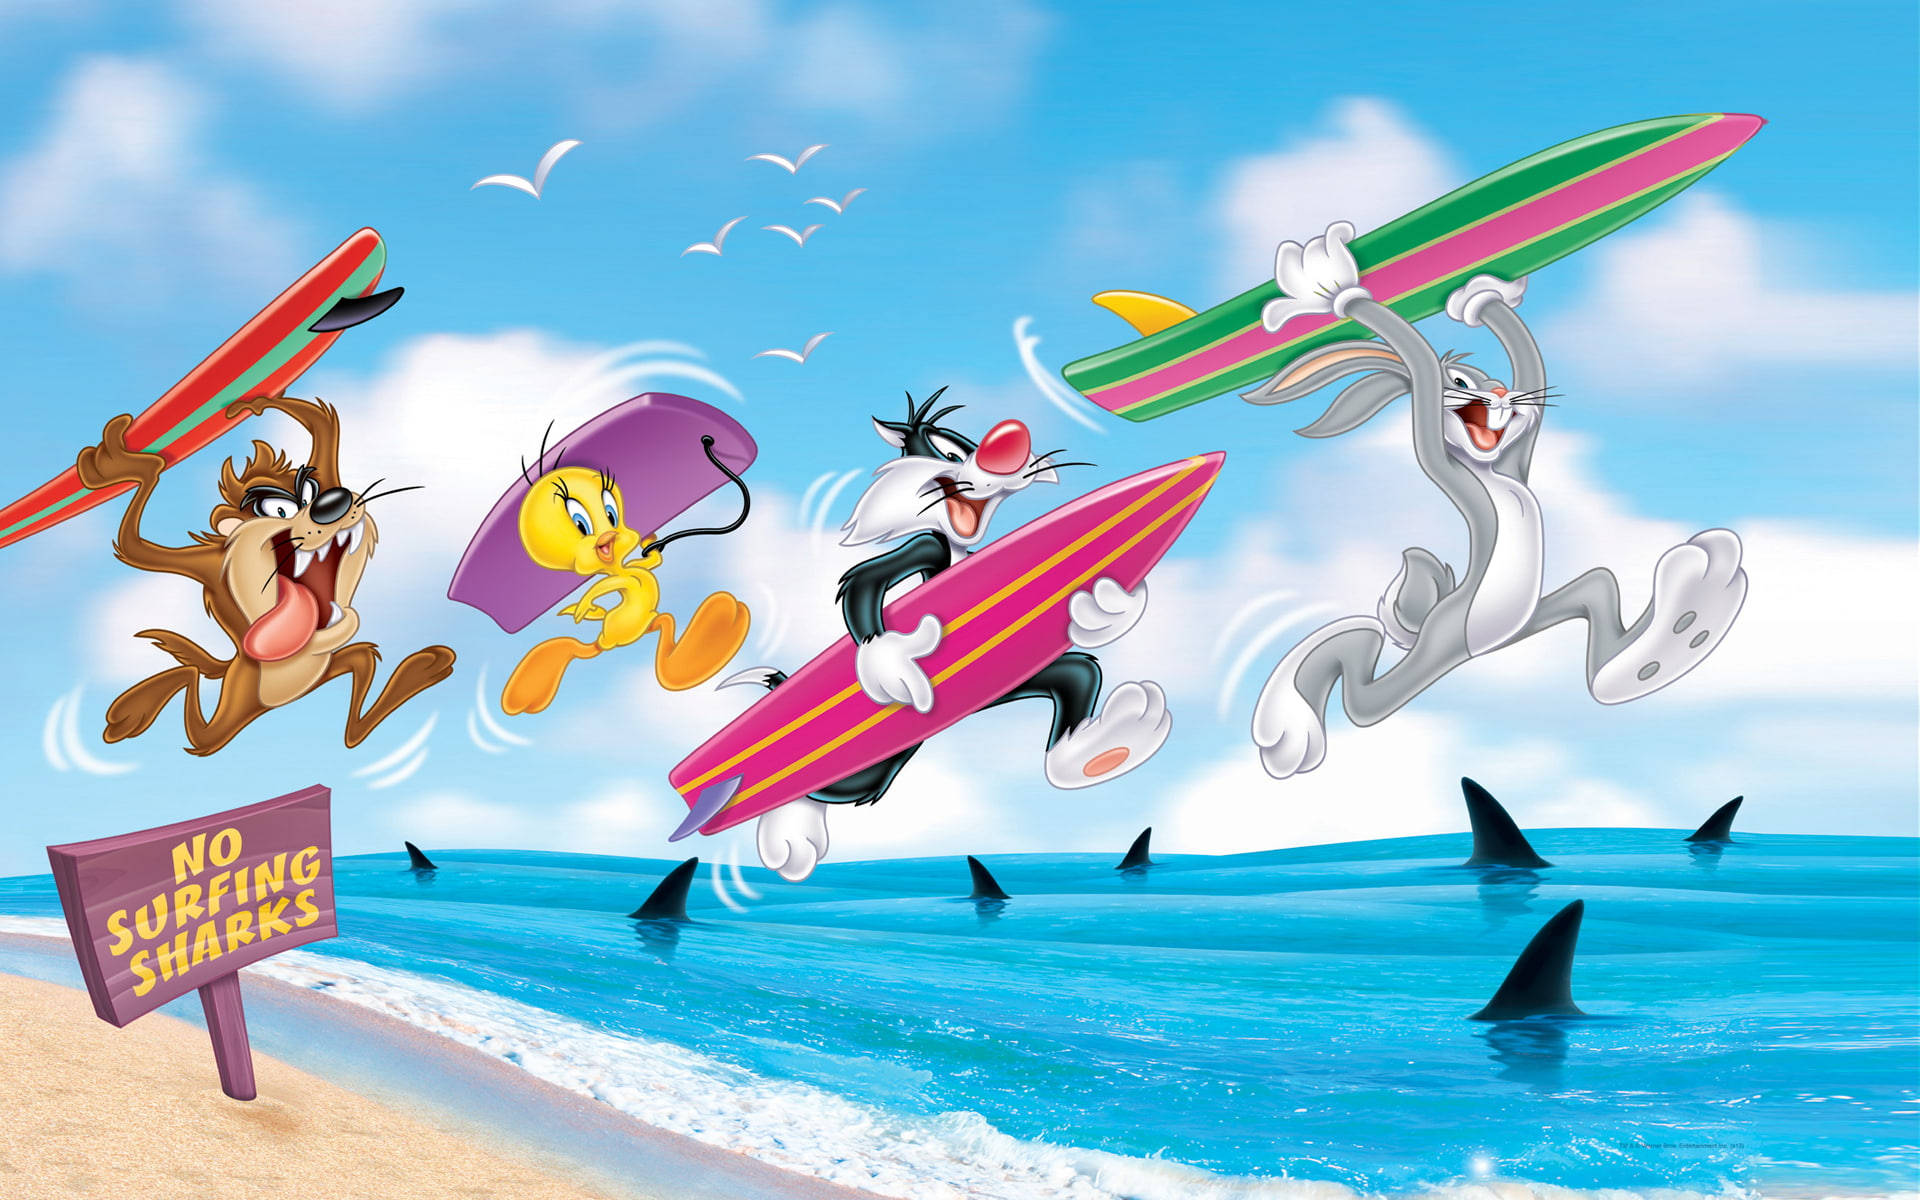 Looney Tunes Surfing With Sharks Background